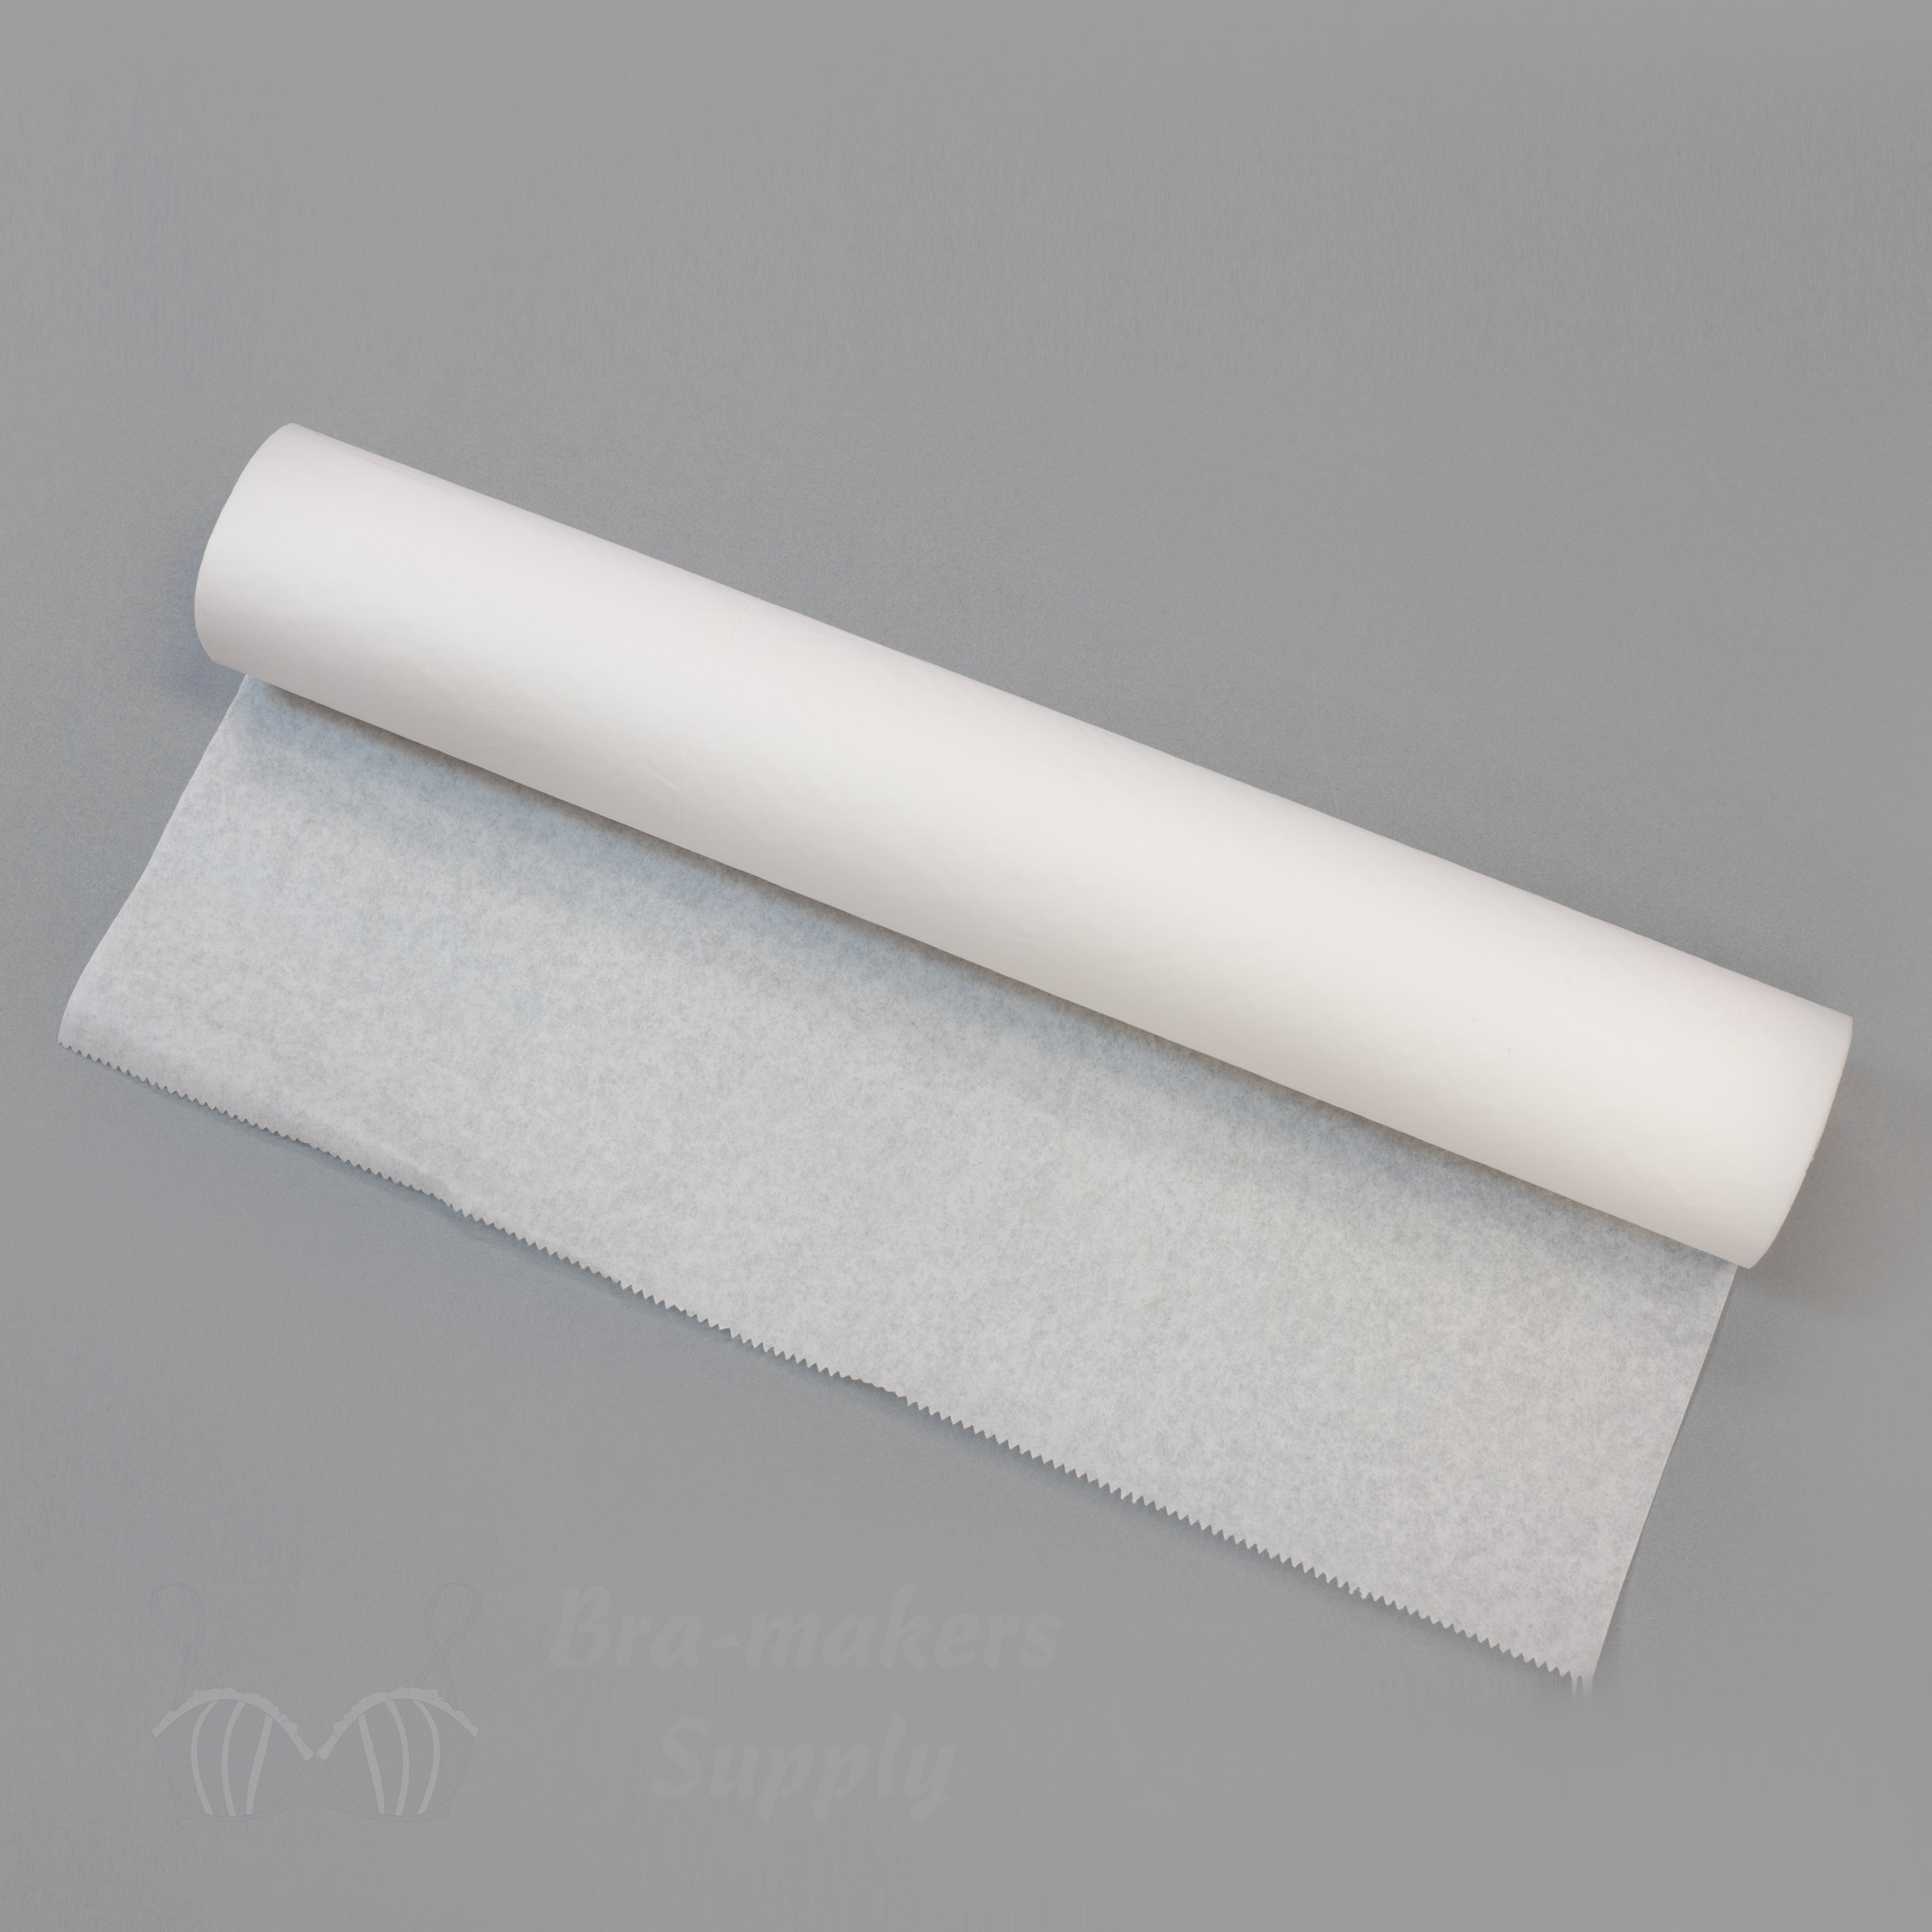 Drafting and Tracing Paper - Bra-Makers Supply